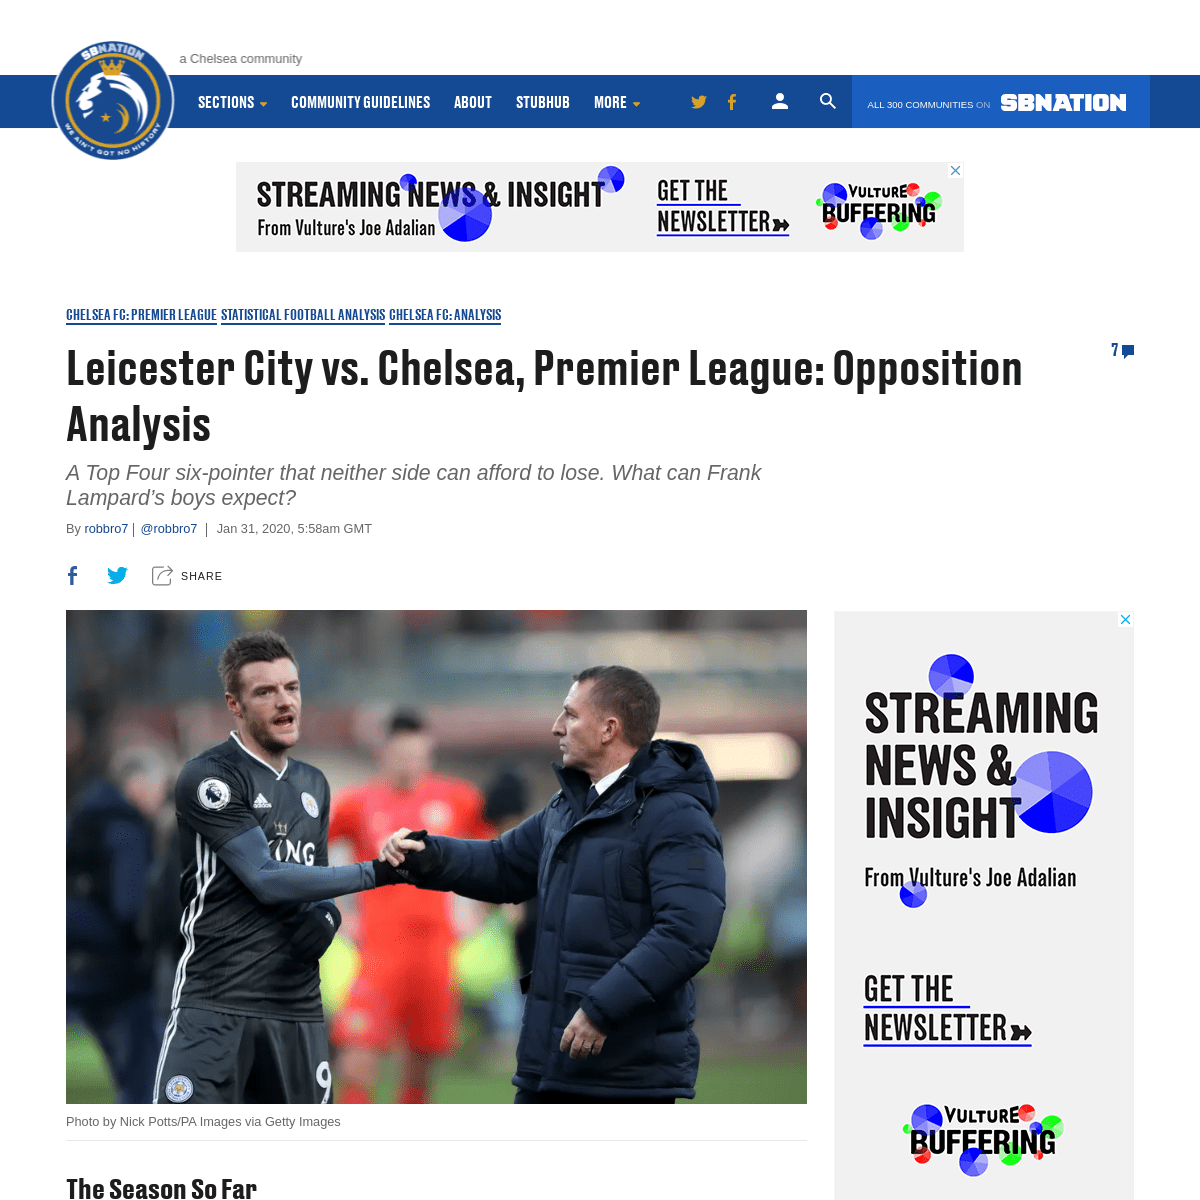 A complete backup of weaintgotnohistory.sbnation.com/2020/1/31/21116280/leicester-city-vs-chelsea-premier-league-opposition-anal